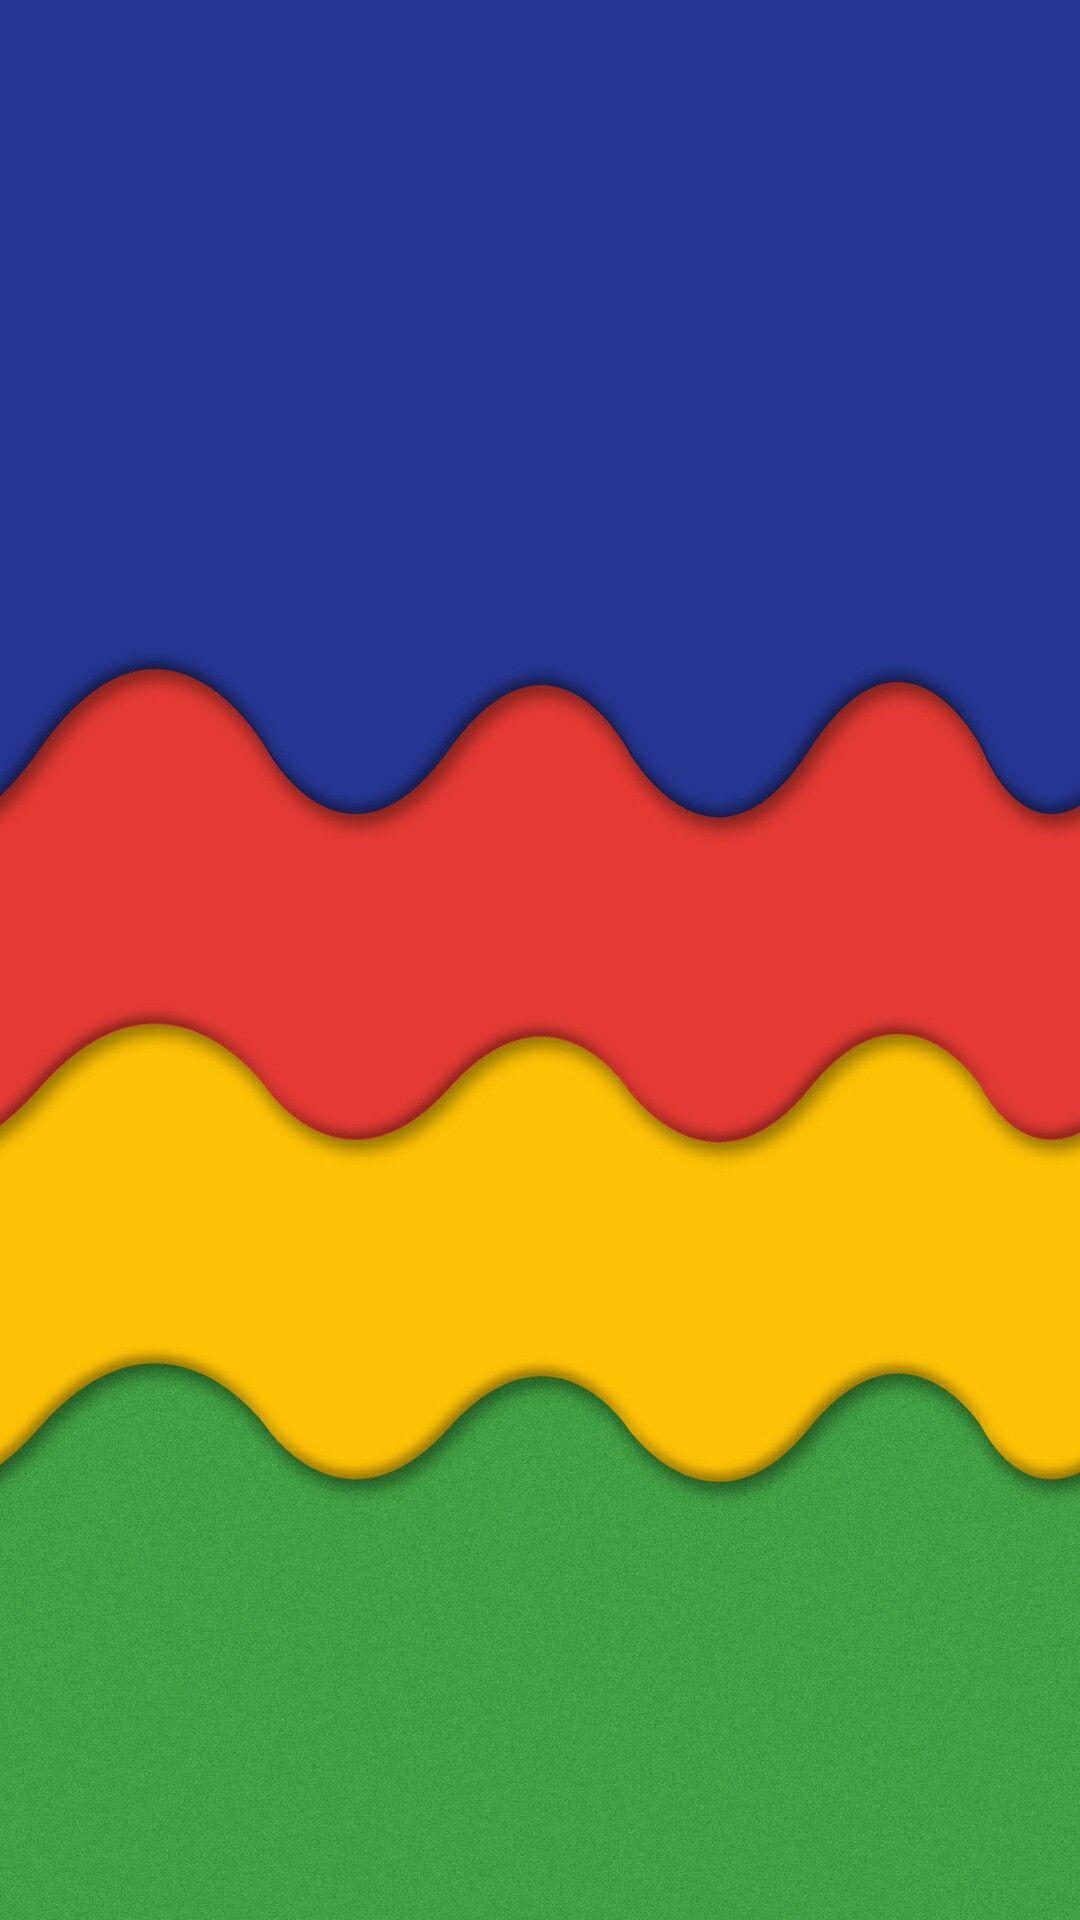 primary colors background